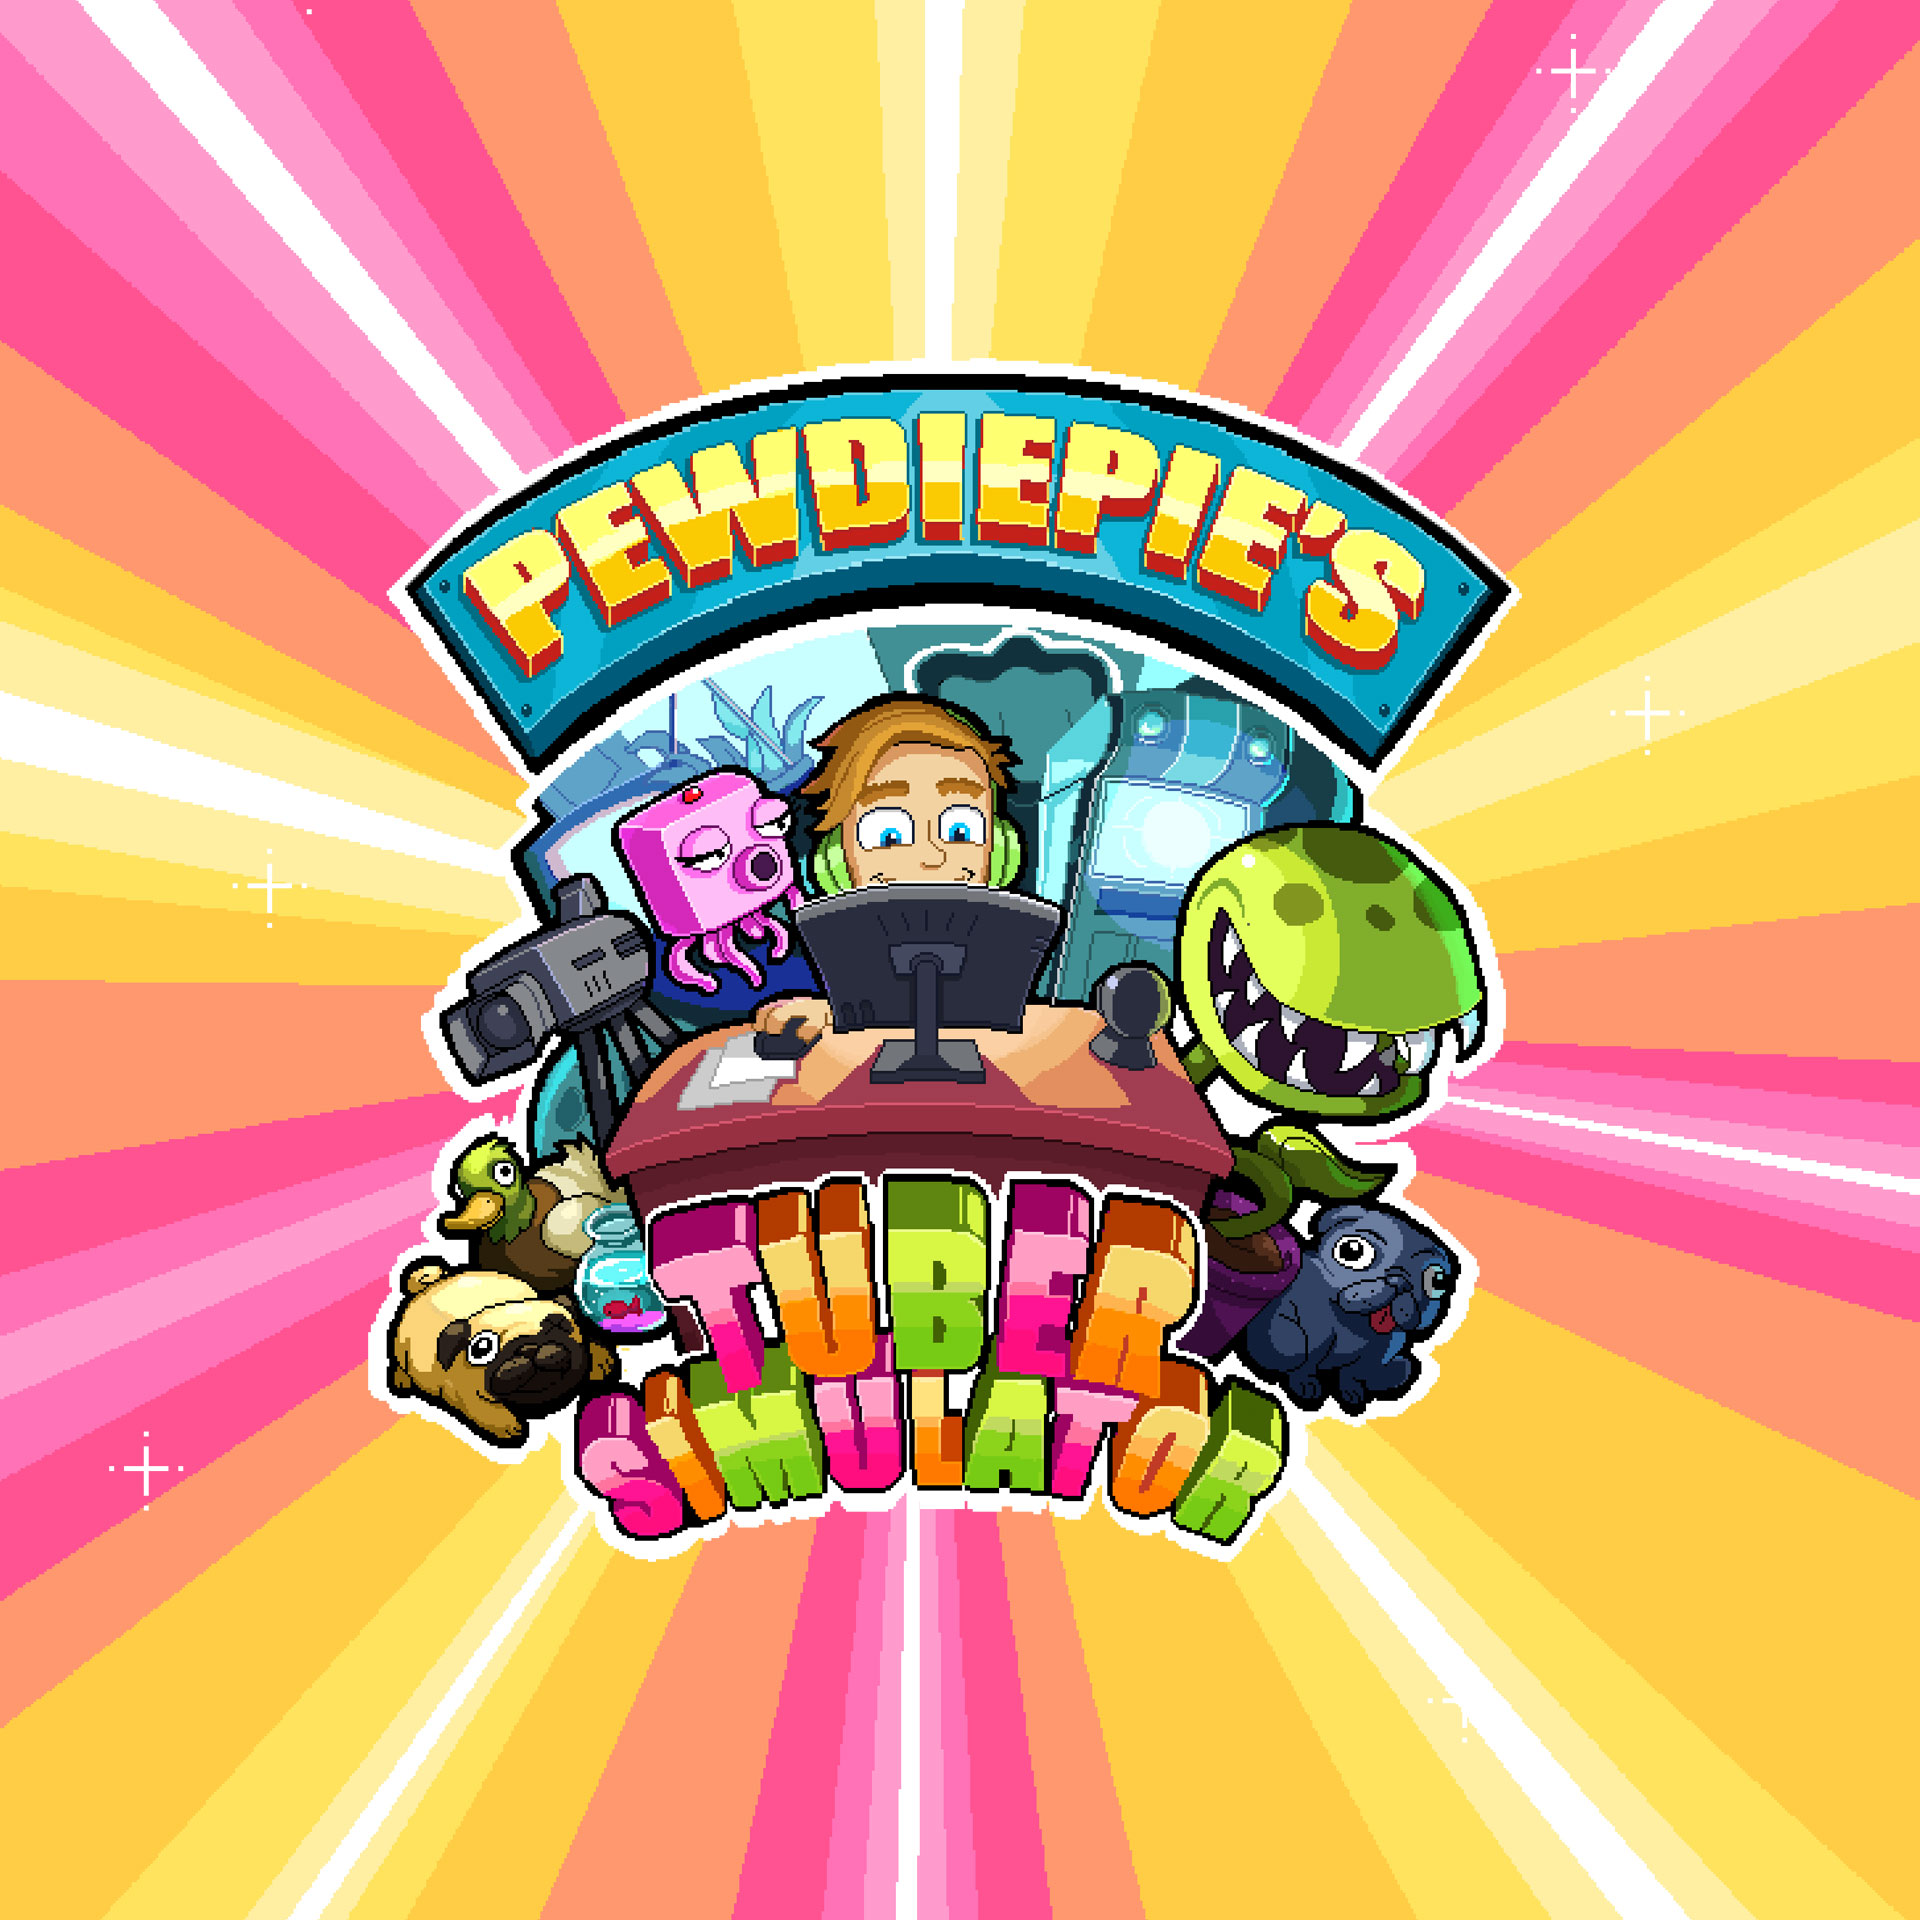 Pewdiepie S Tuber Simulator Video Game Outerminds Montreal Studio